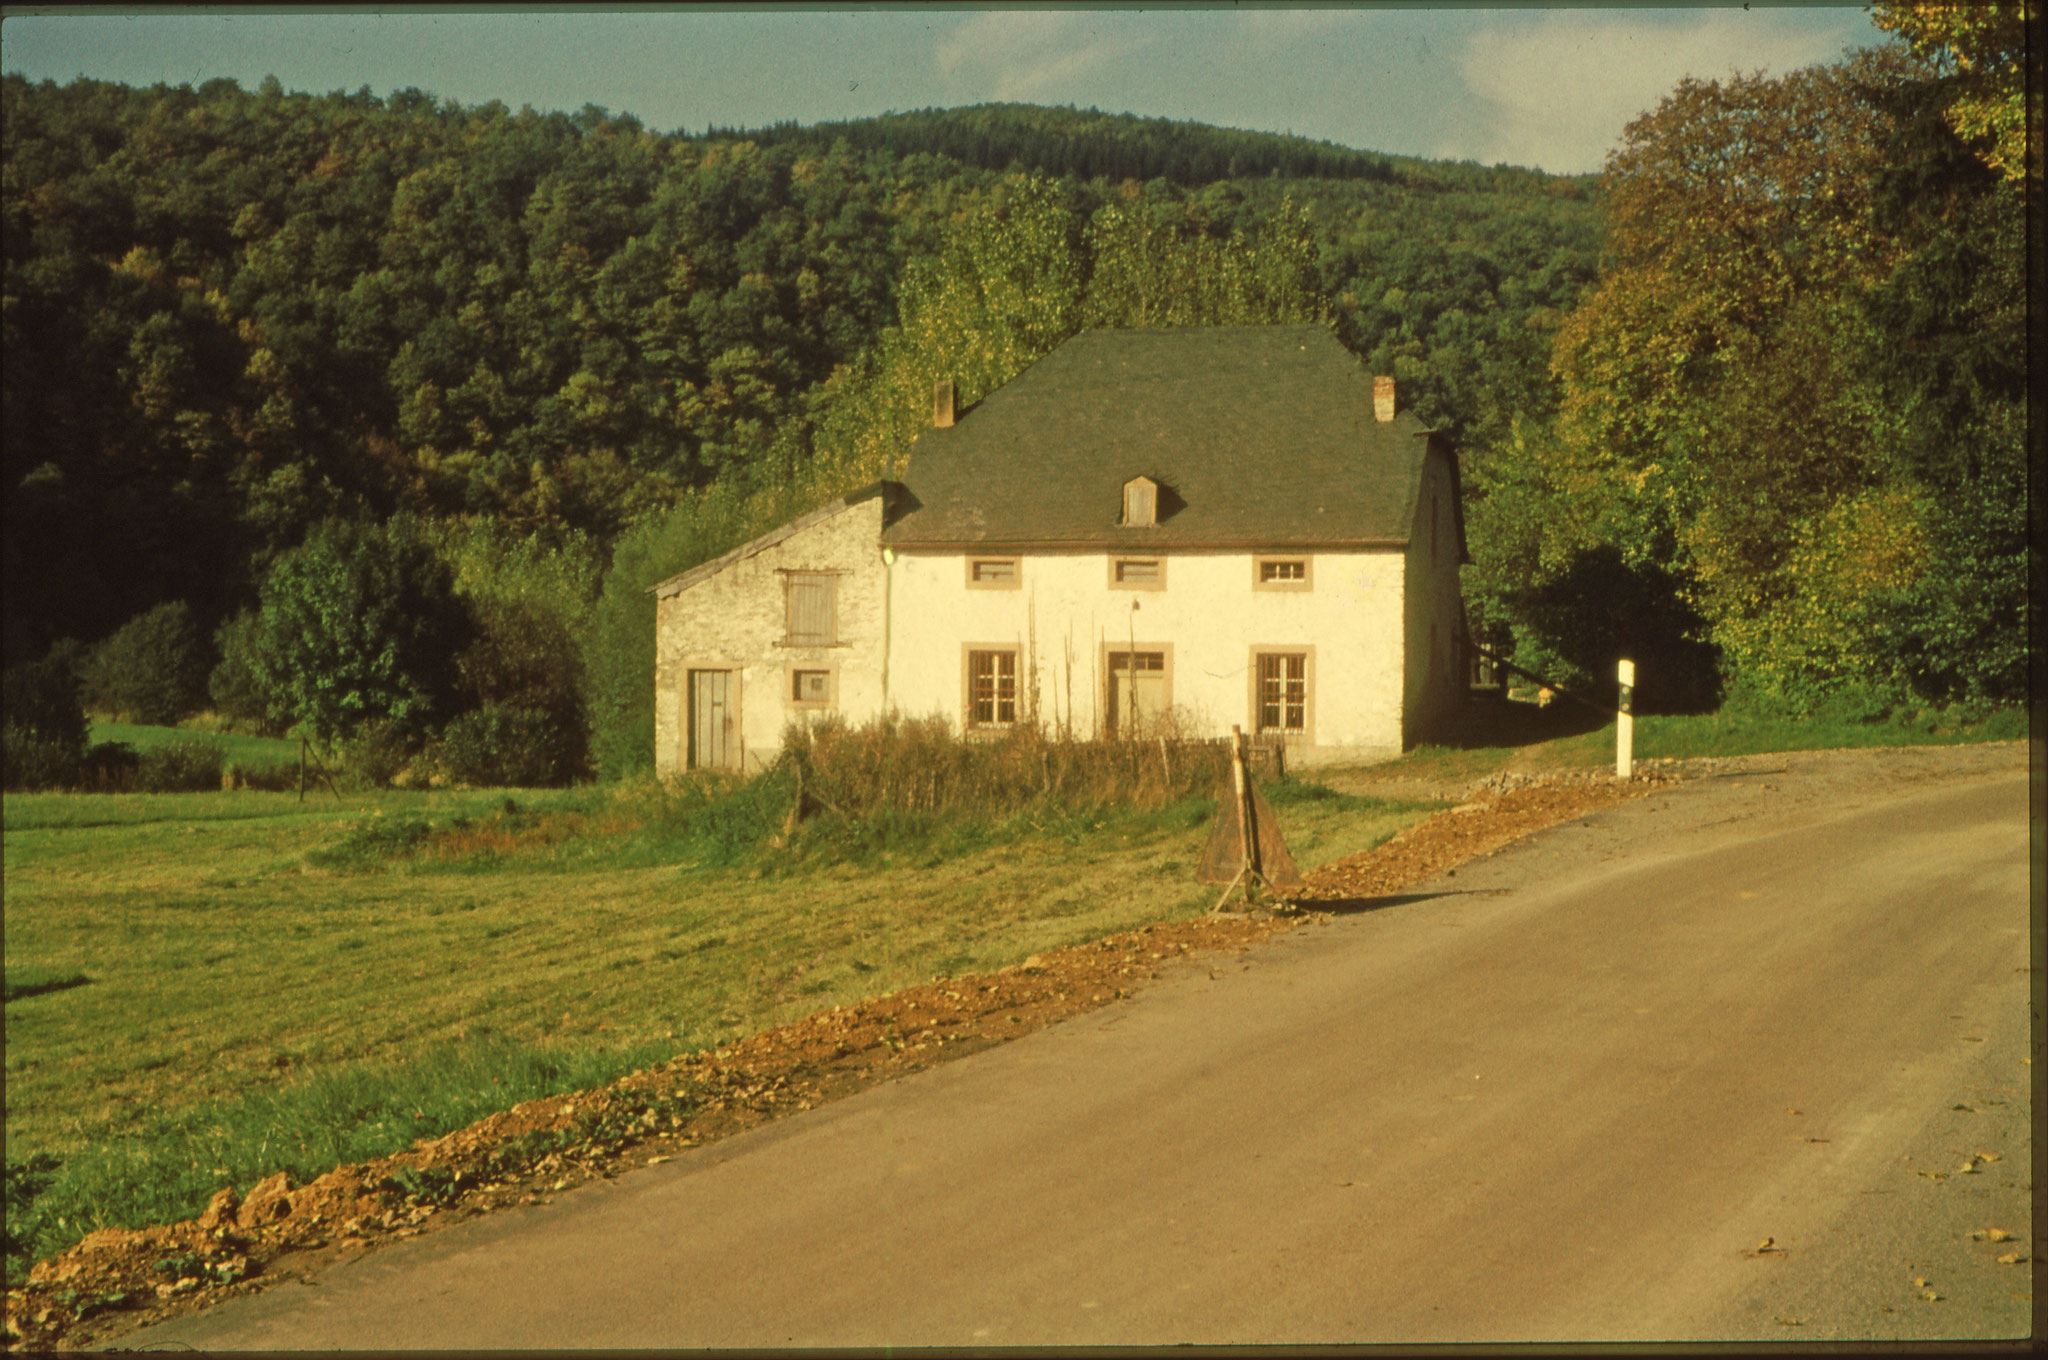 before the renovation, before 1960